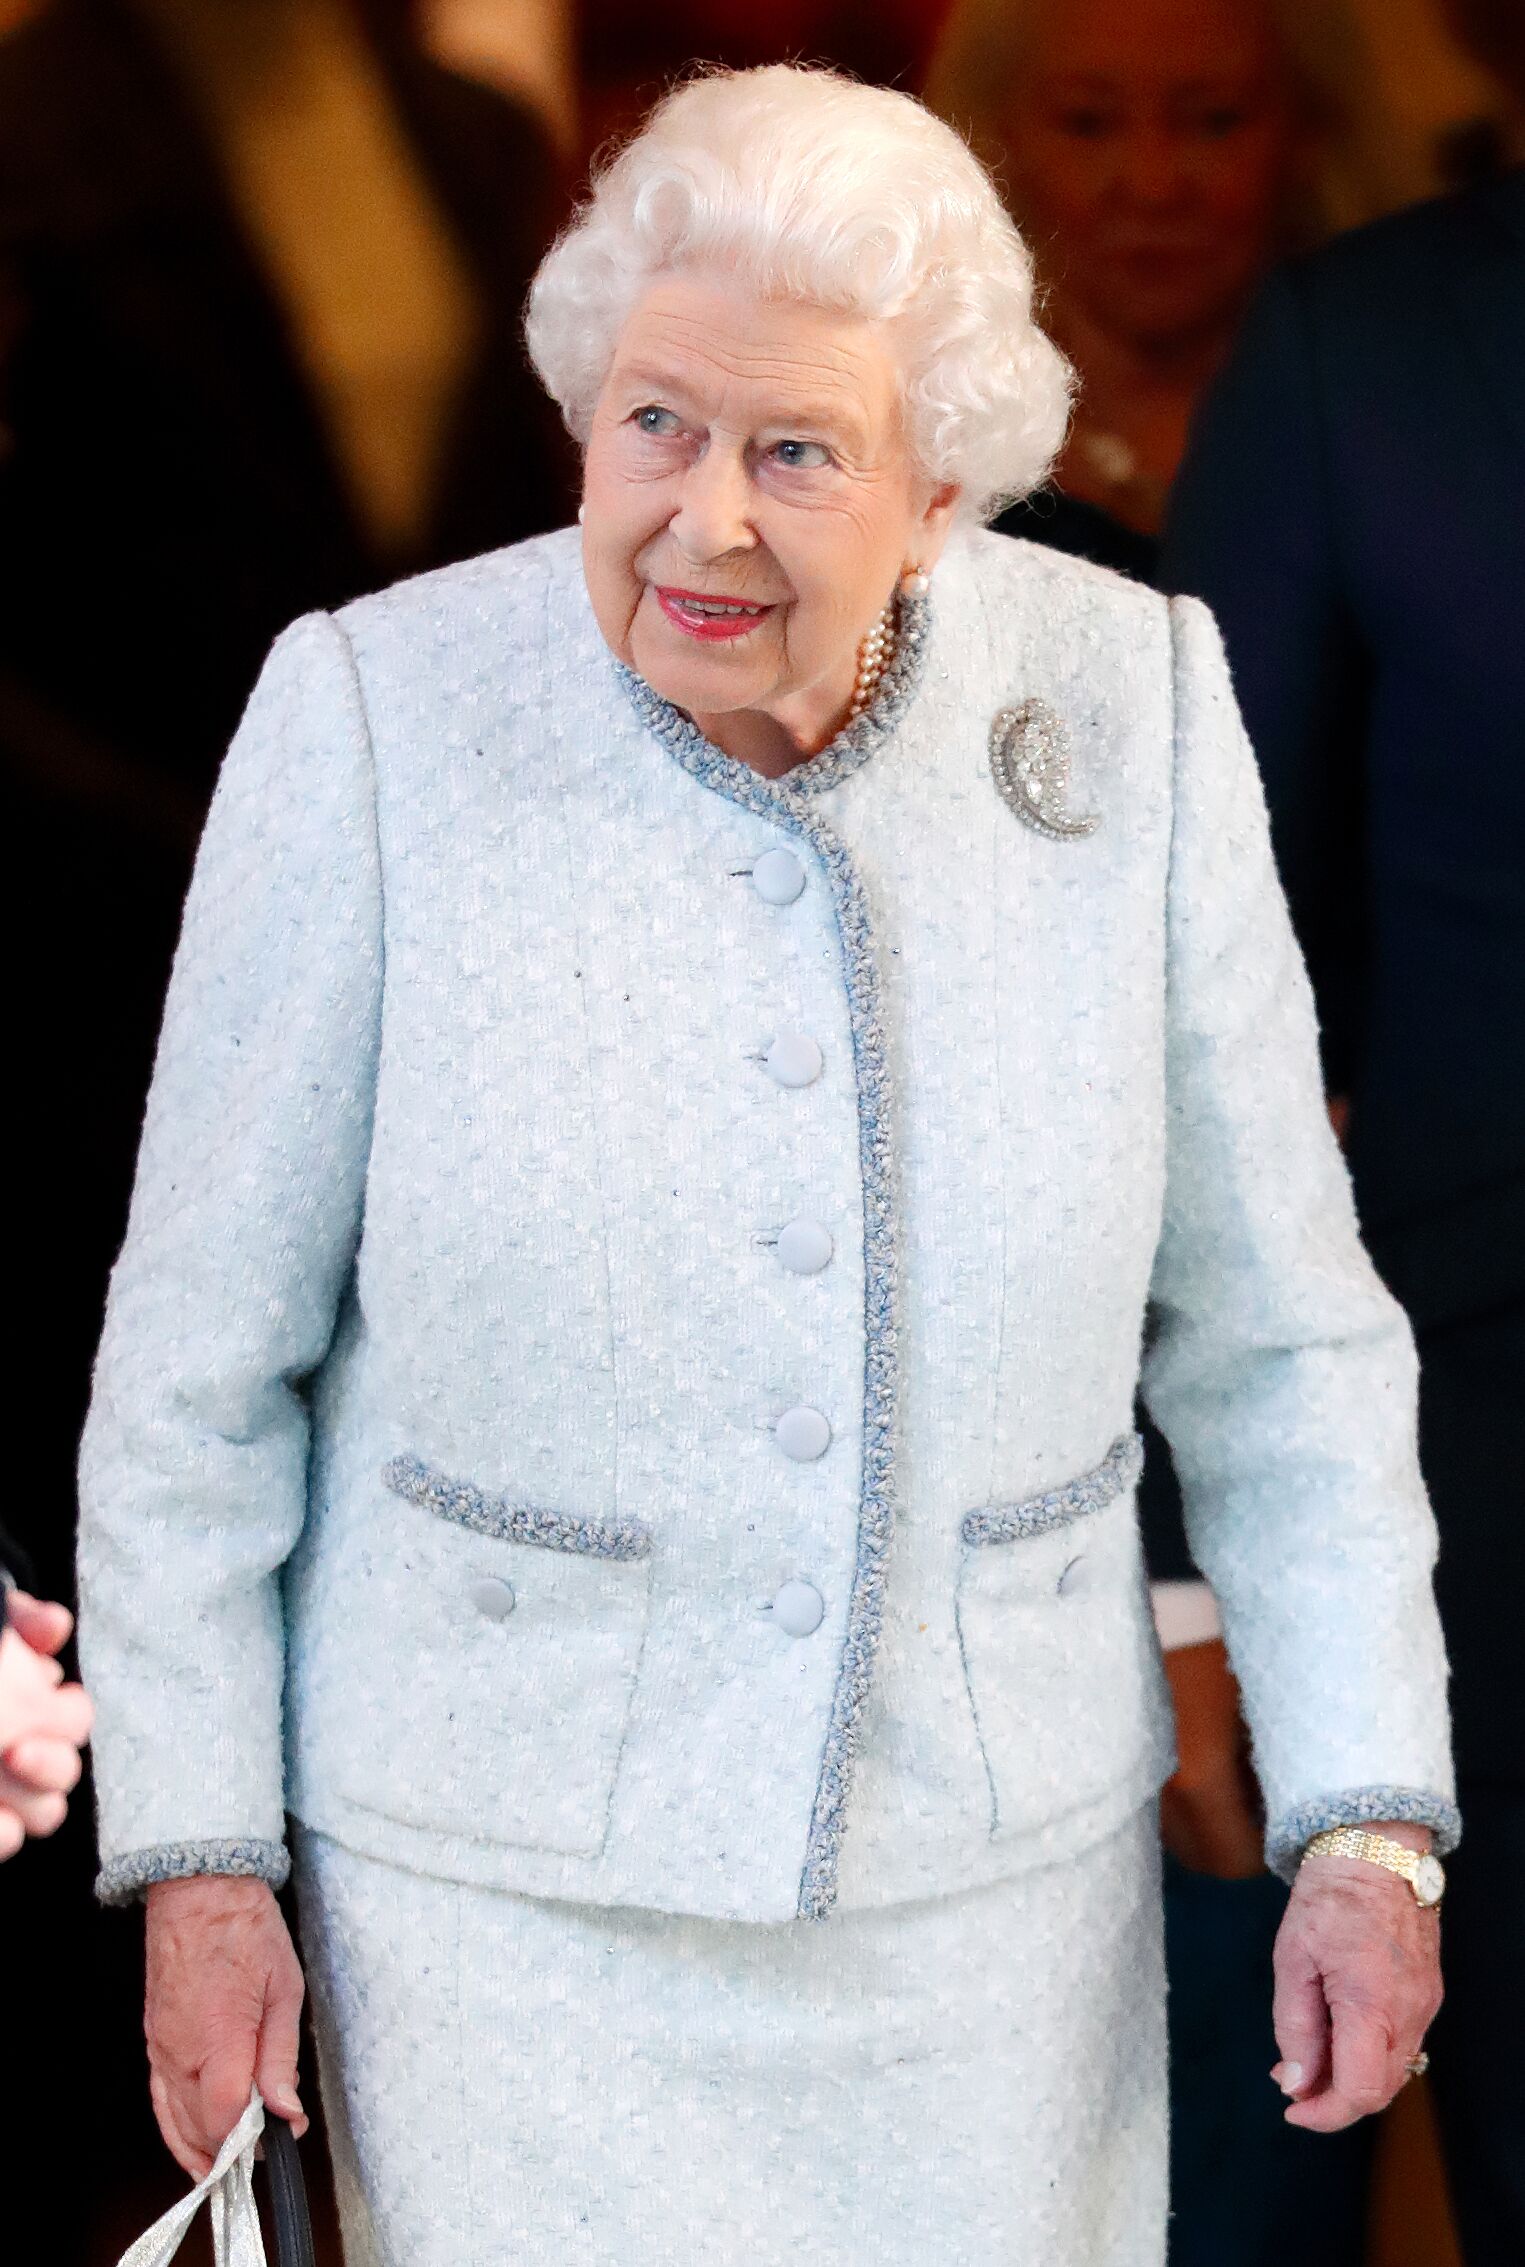 Queen Elizabeth II at a Christmas lunch on December 11, 2018, in London, England | Photo: Max Mumby/Getty Images